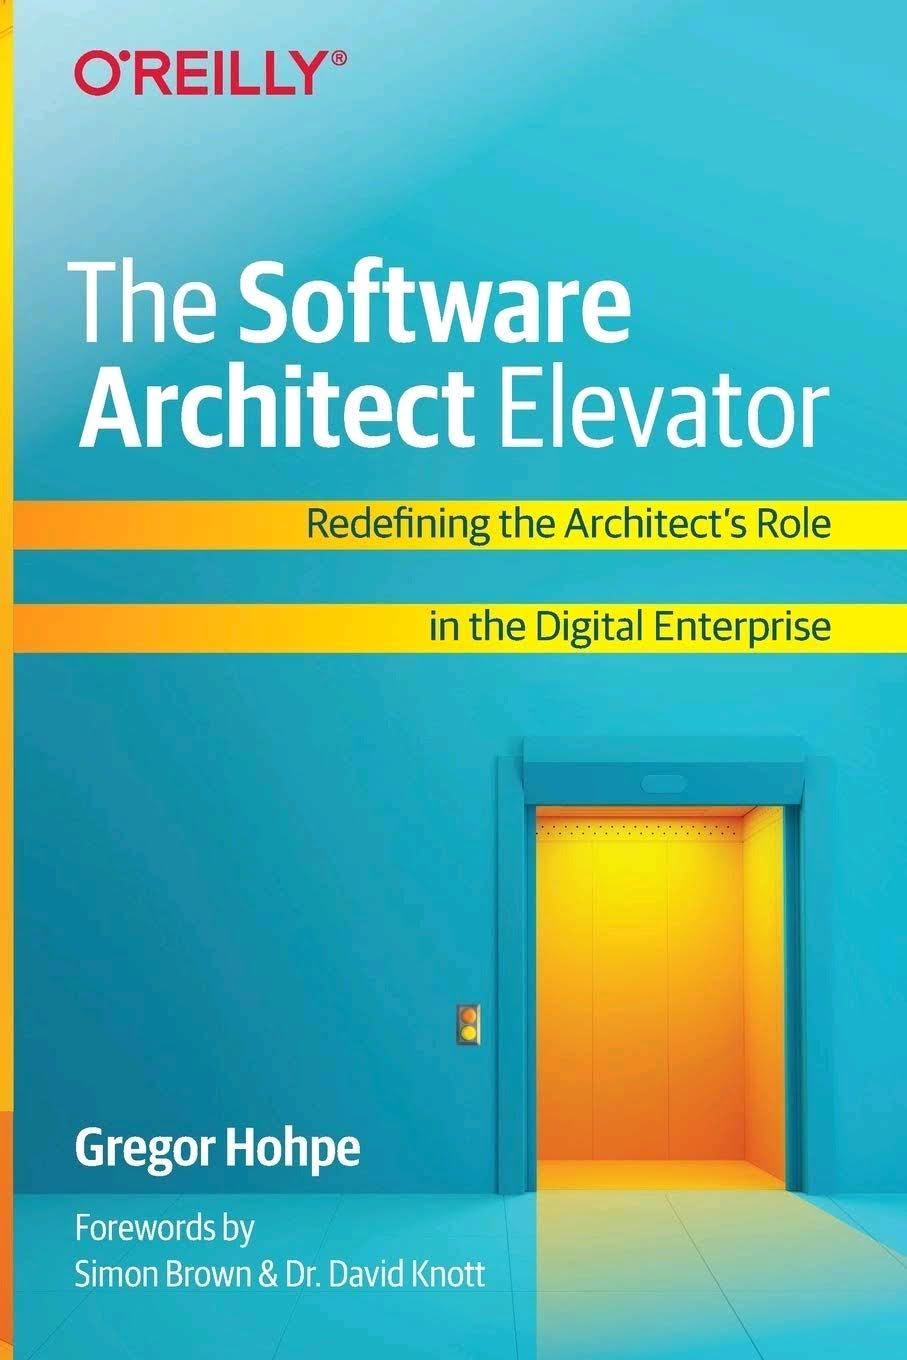 Book Review: The Software Architect Elevator